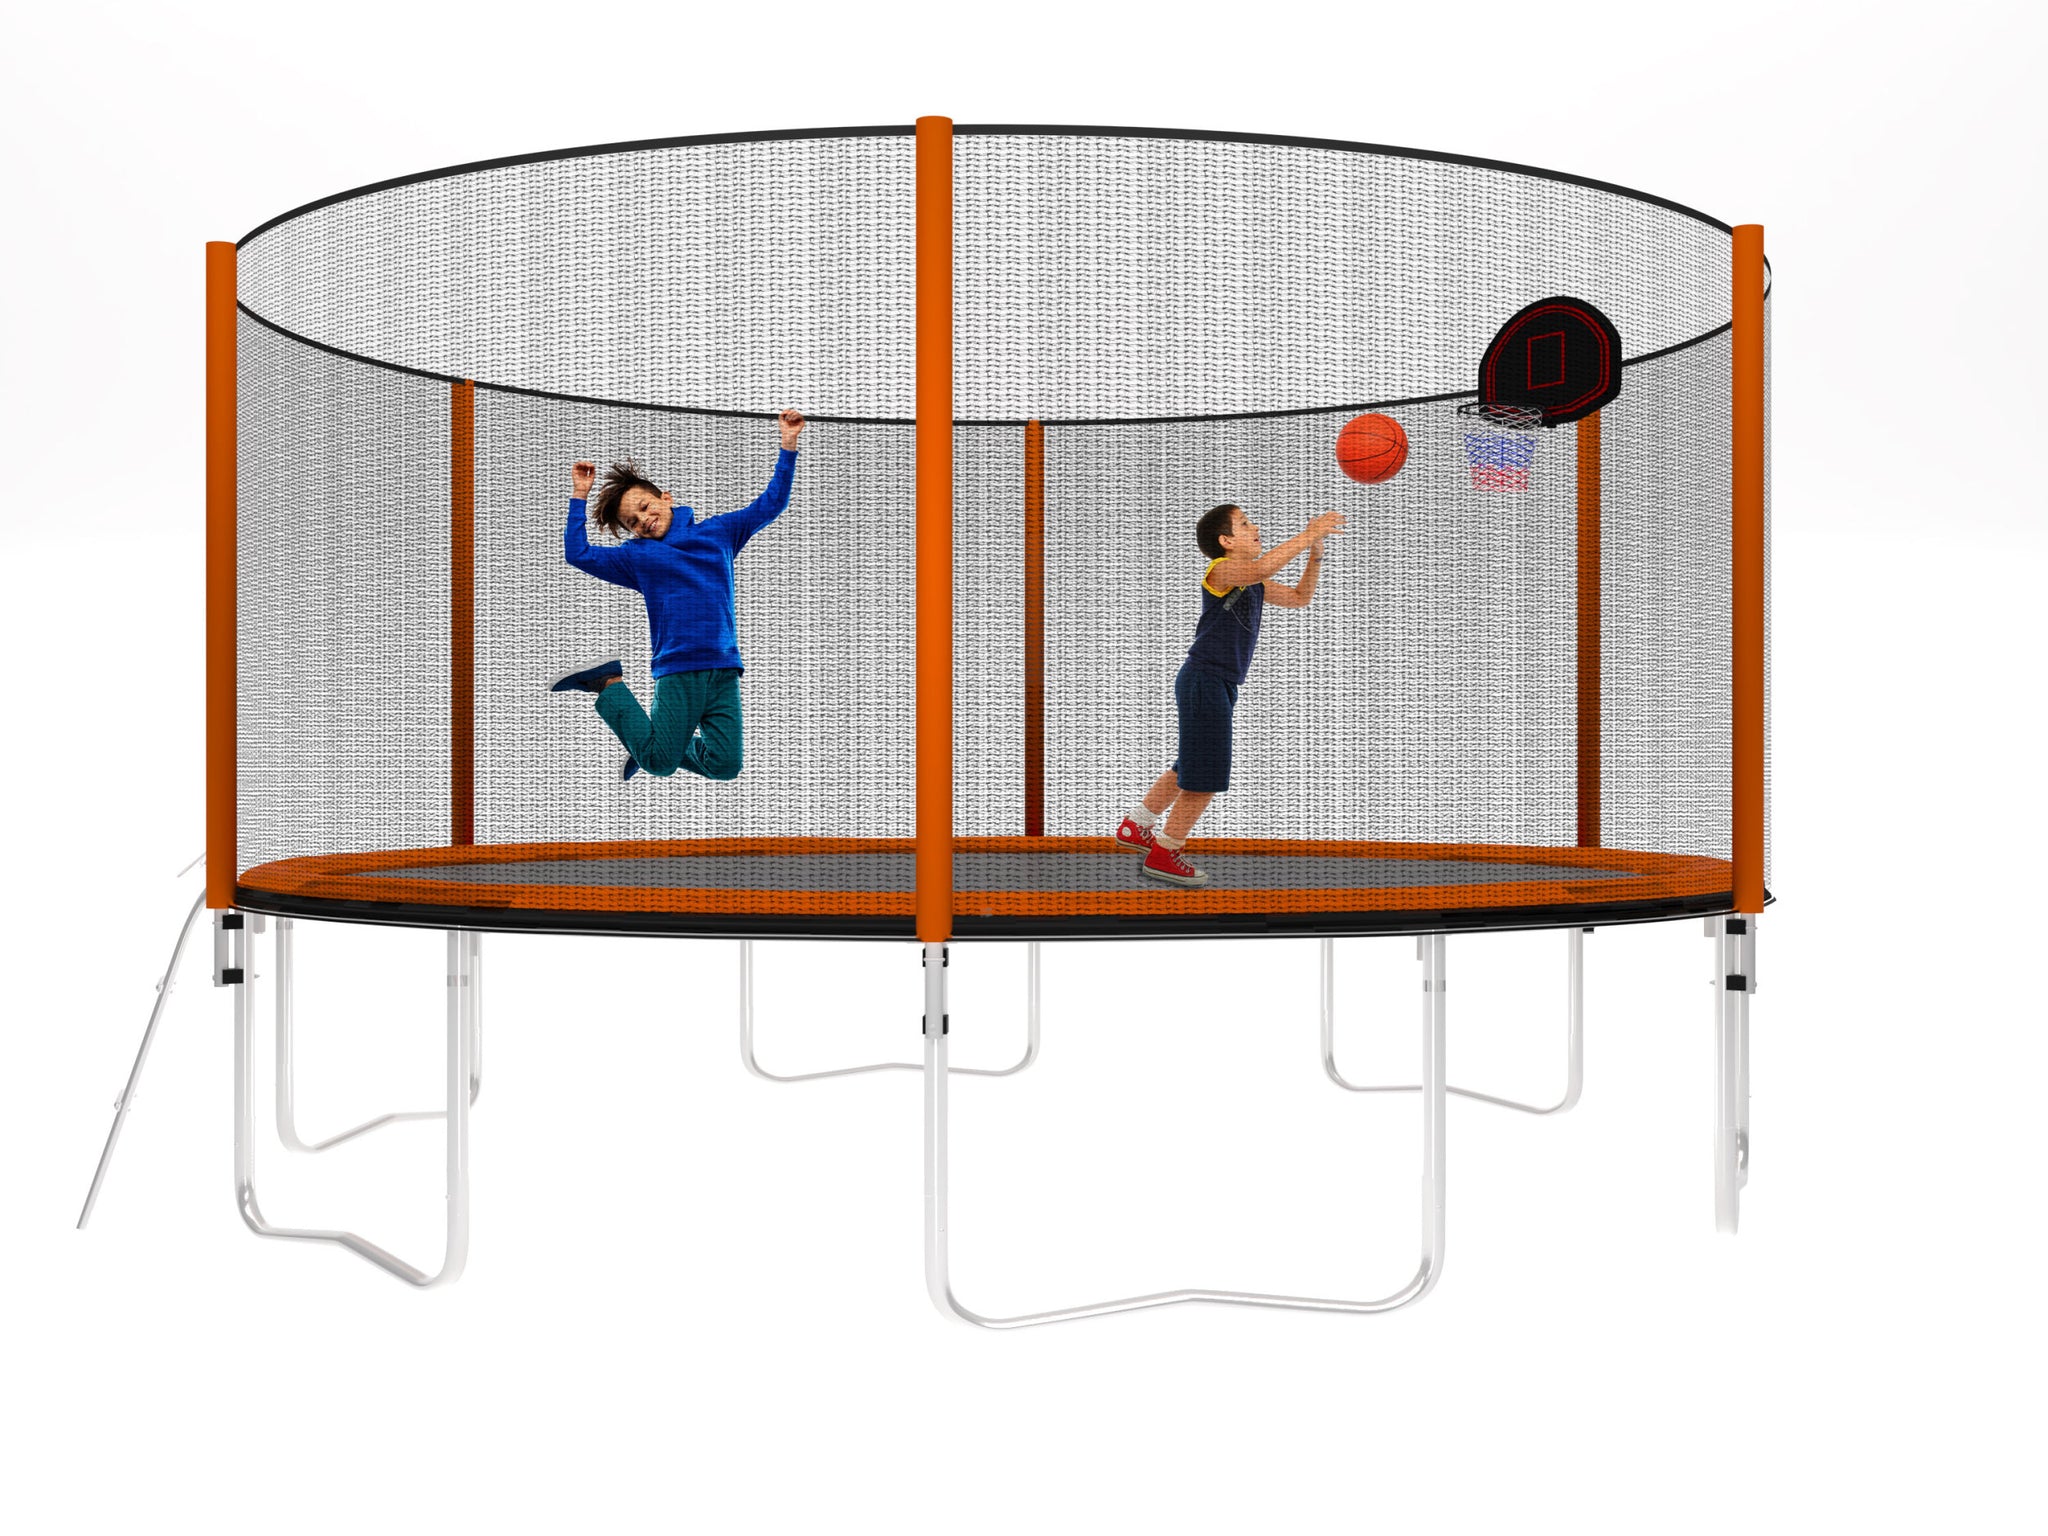 14ft Powder coated Advanced Trampoline with